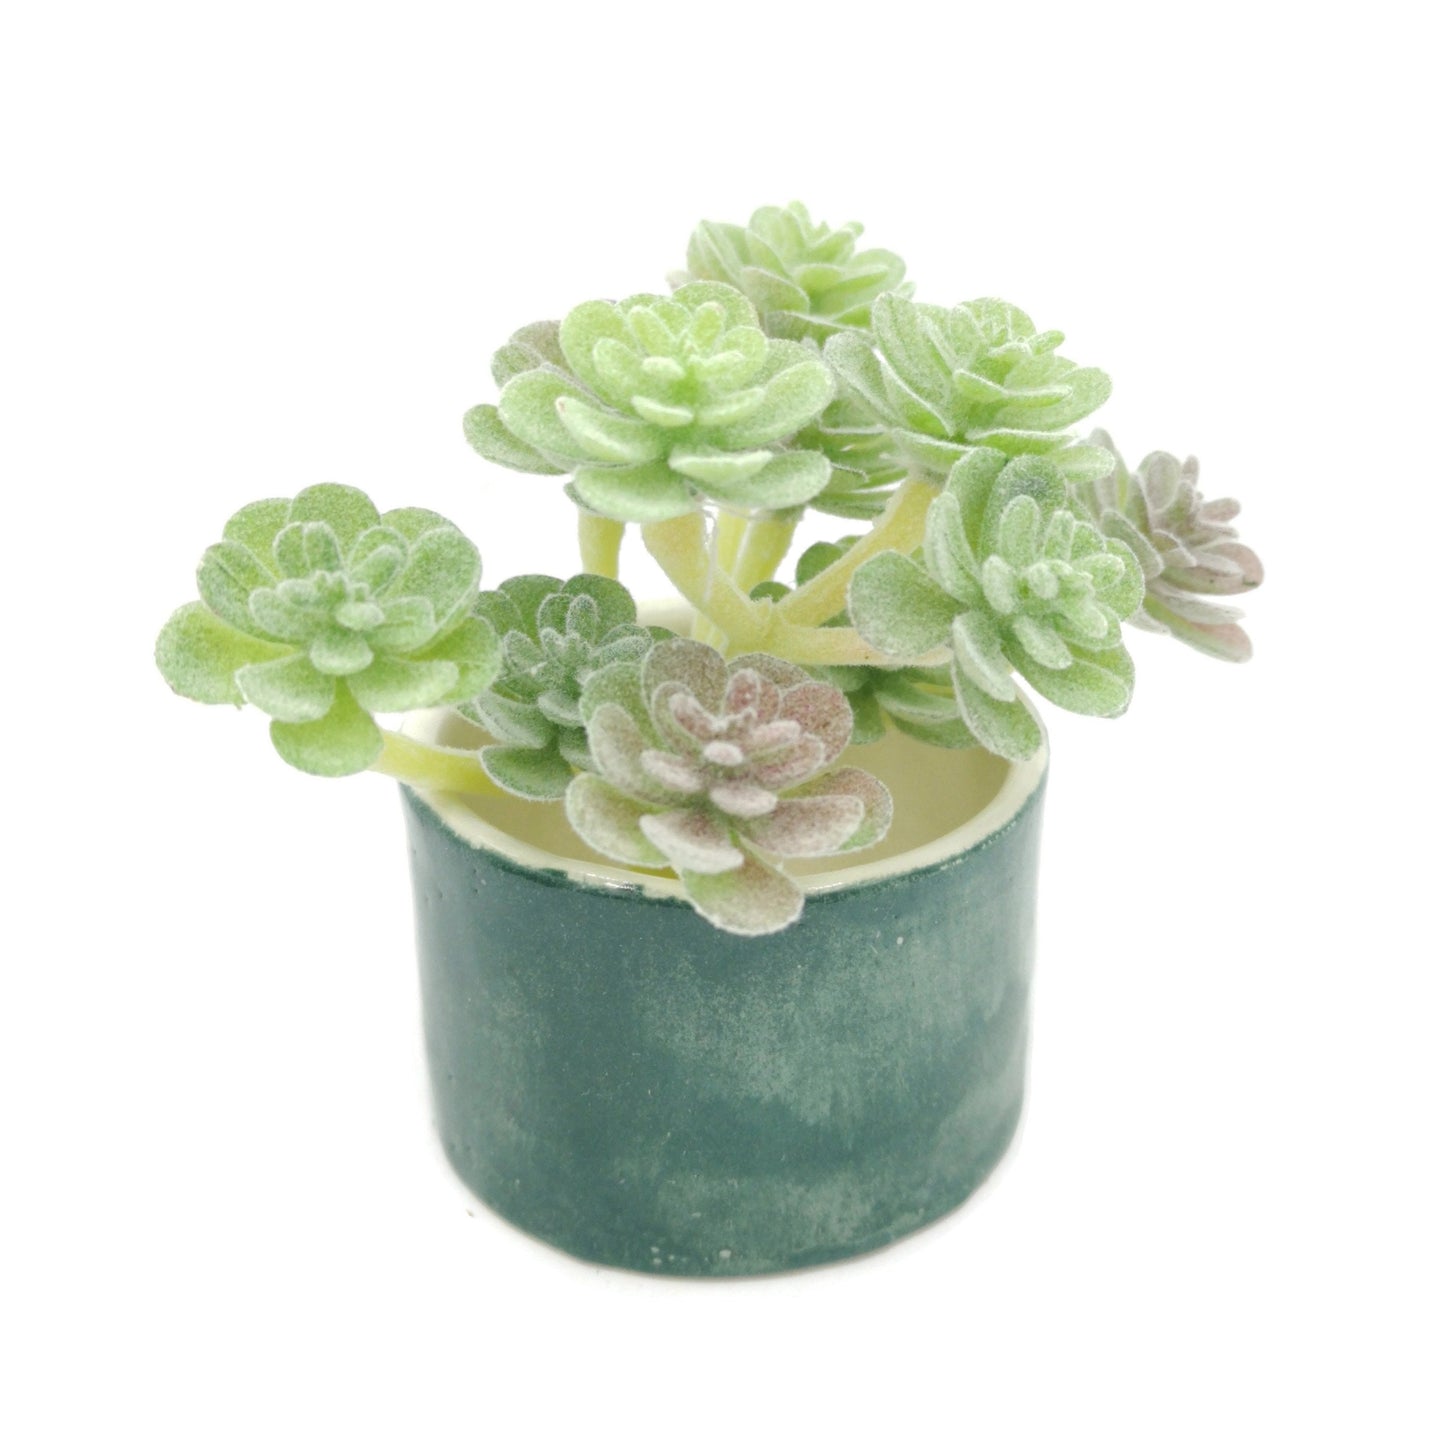 Handmade Ceramic Planter, Small Green Vase for Cactus or Succulents, Mom Birthday Gift From Daughter, Office Desk Accessories For Women - Ceramica Ana Rafael